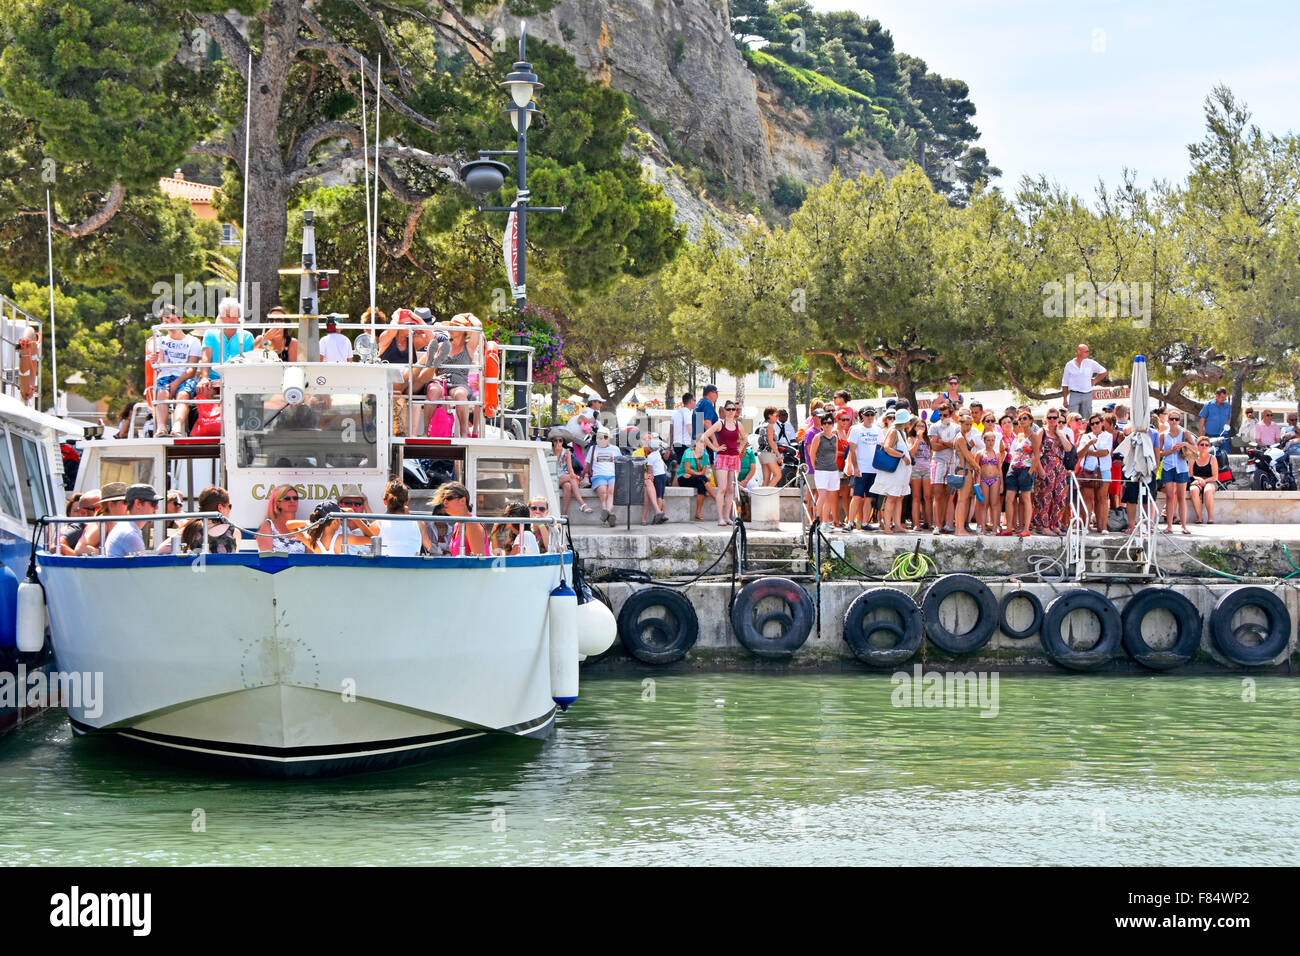 Cassis France Provence crowded harbour tourist boat awaiting departure trip to Calanque coves crowd of people waiting for next boat wall tyre buffers Stock Photo